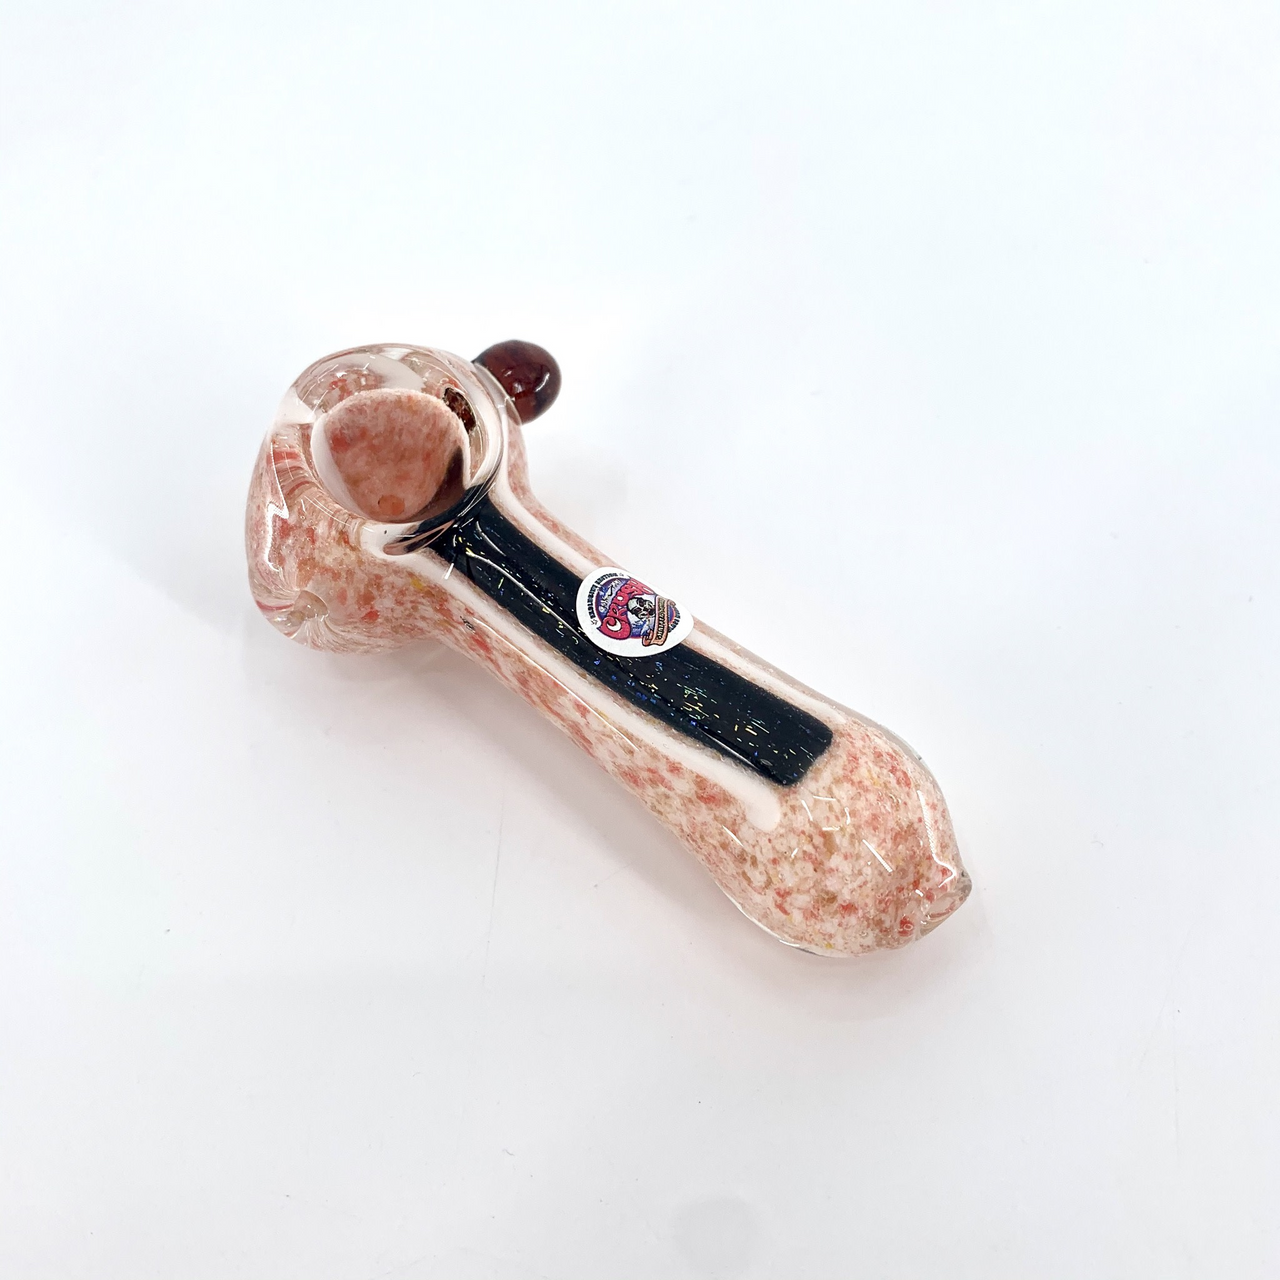 The Crush Glass: Bright Frit Hand Pipe (3")